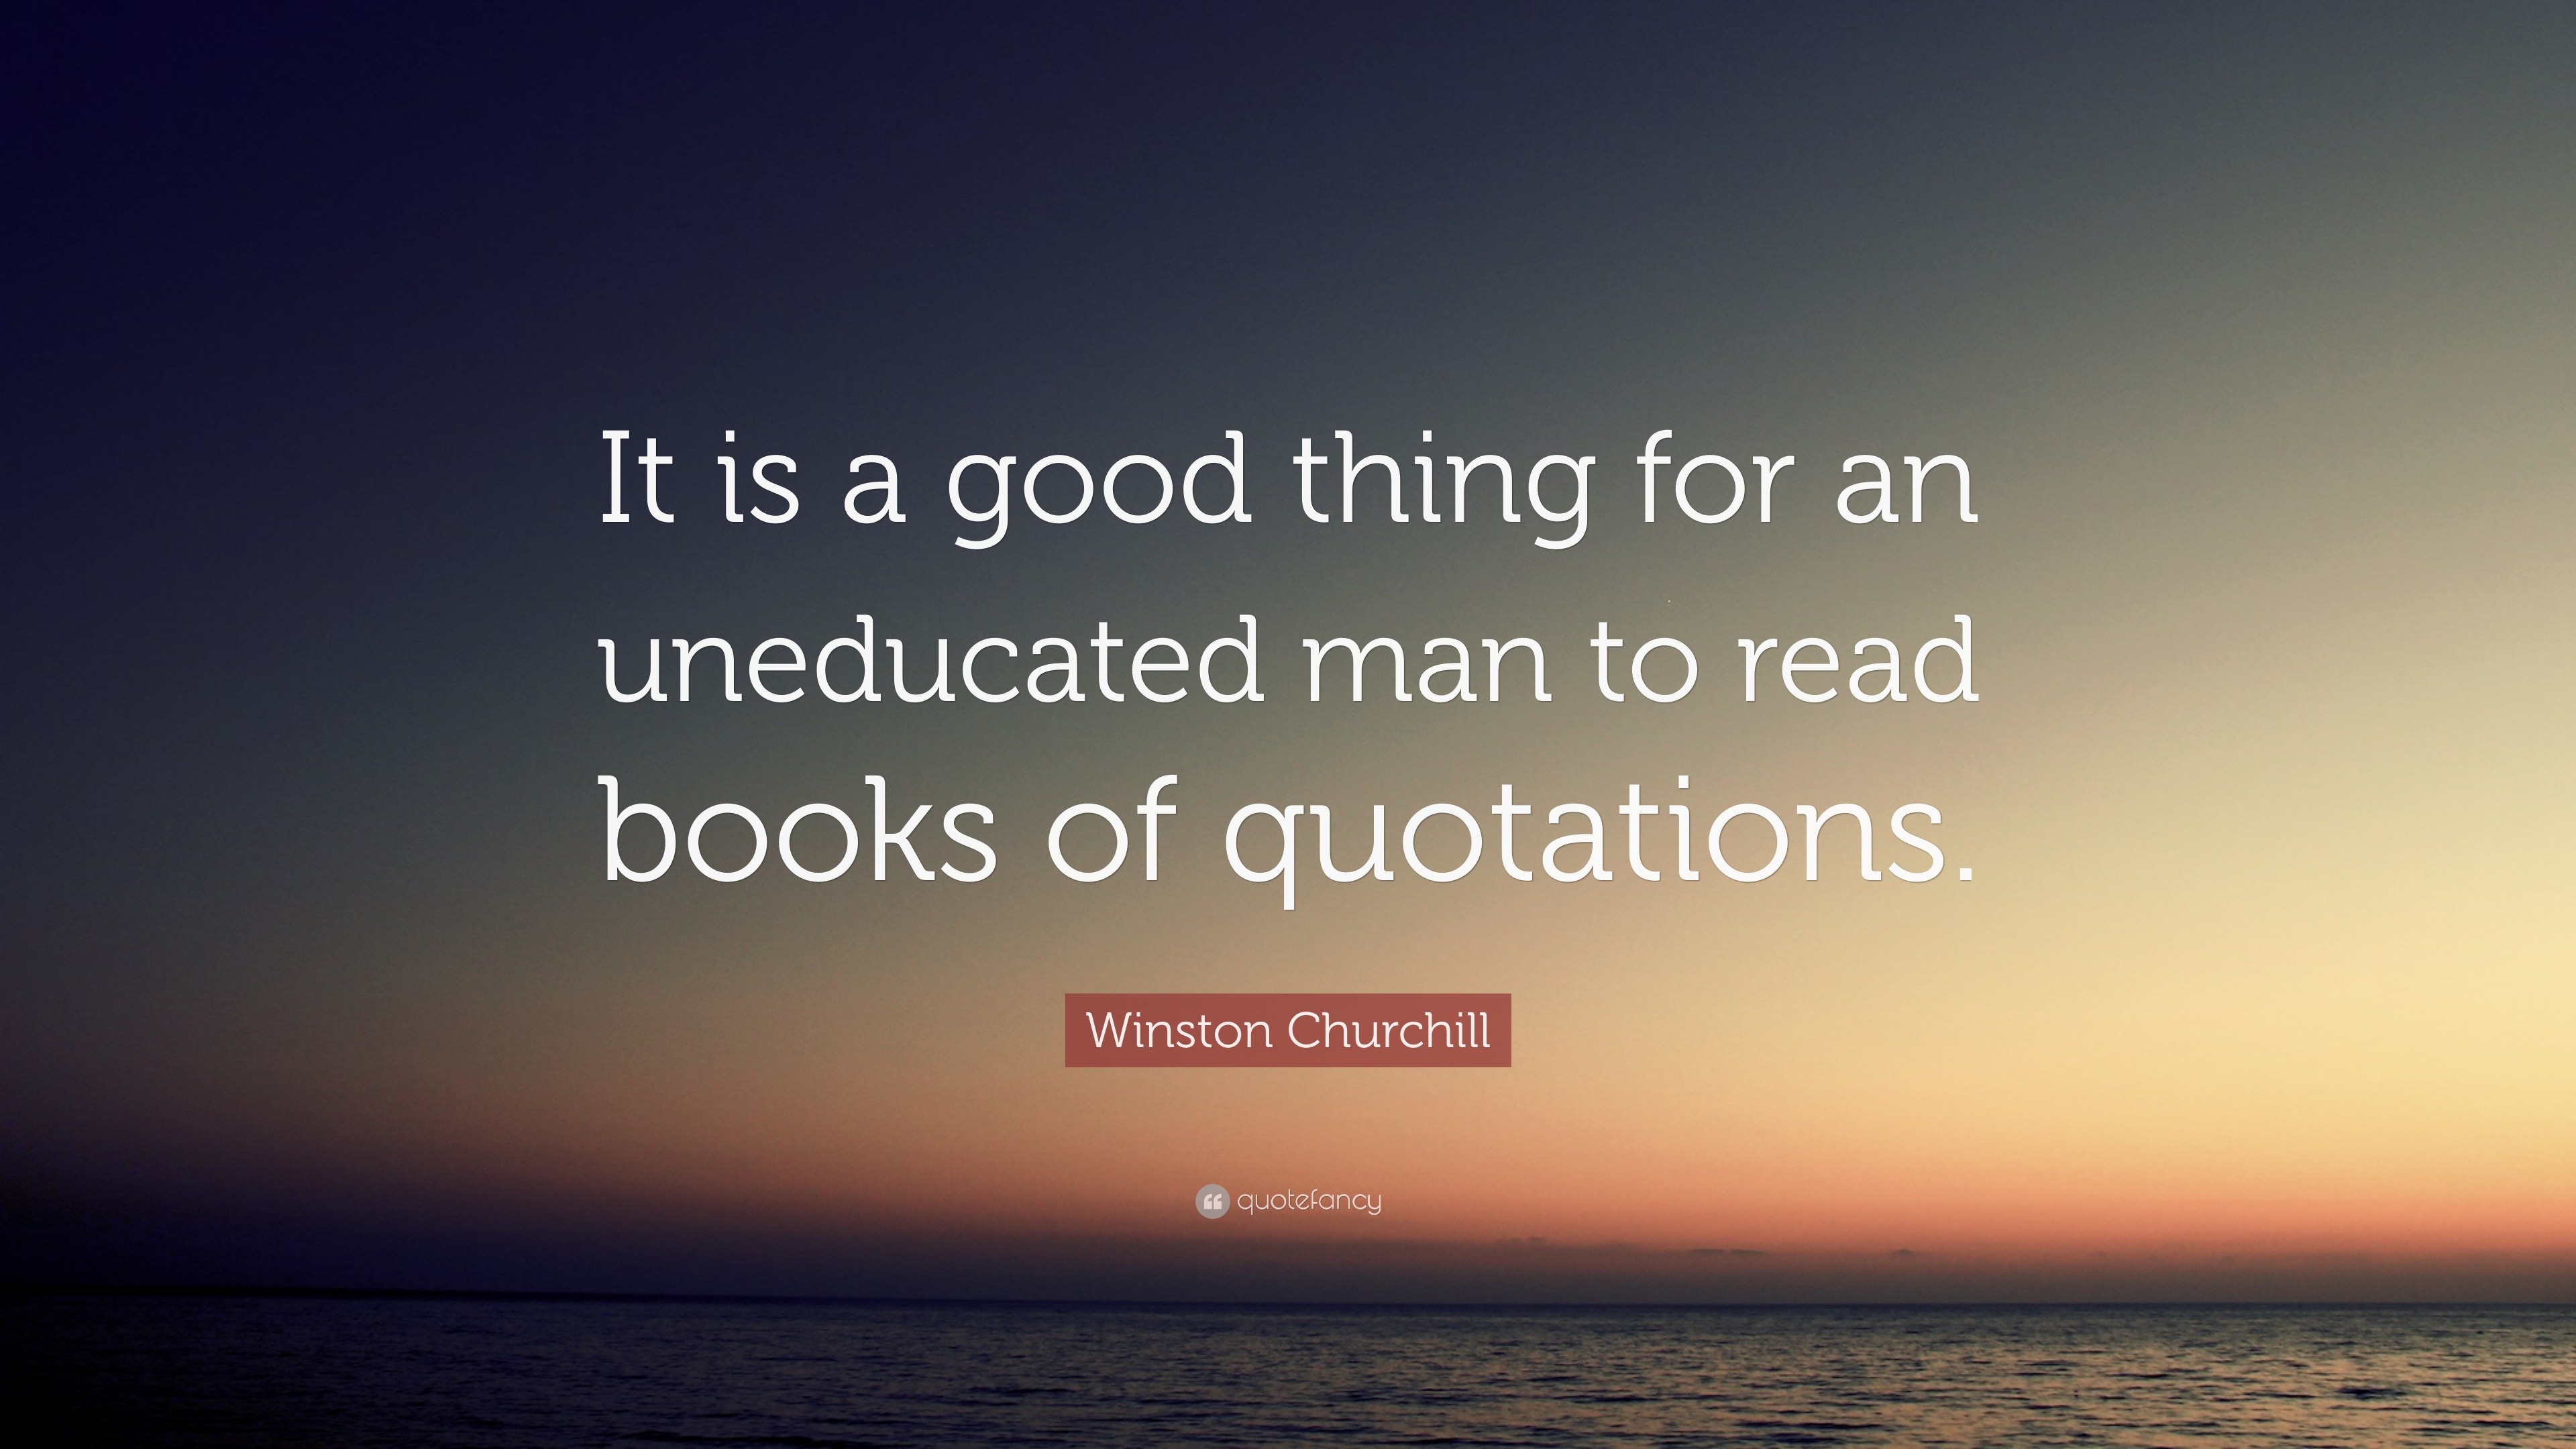 Winston Churchill Quote: “It is a good thing for an uneducated man to ...